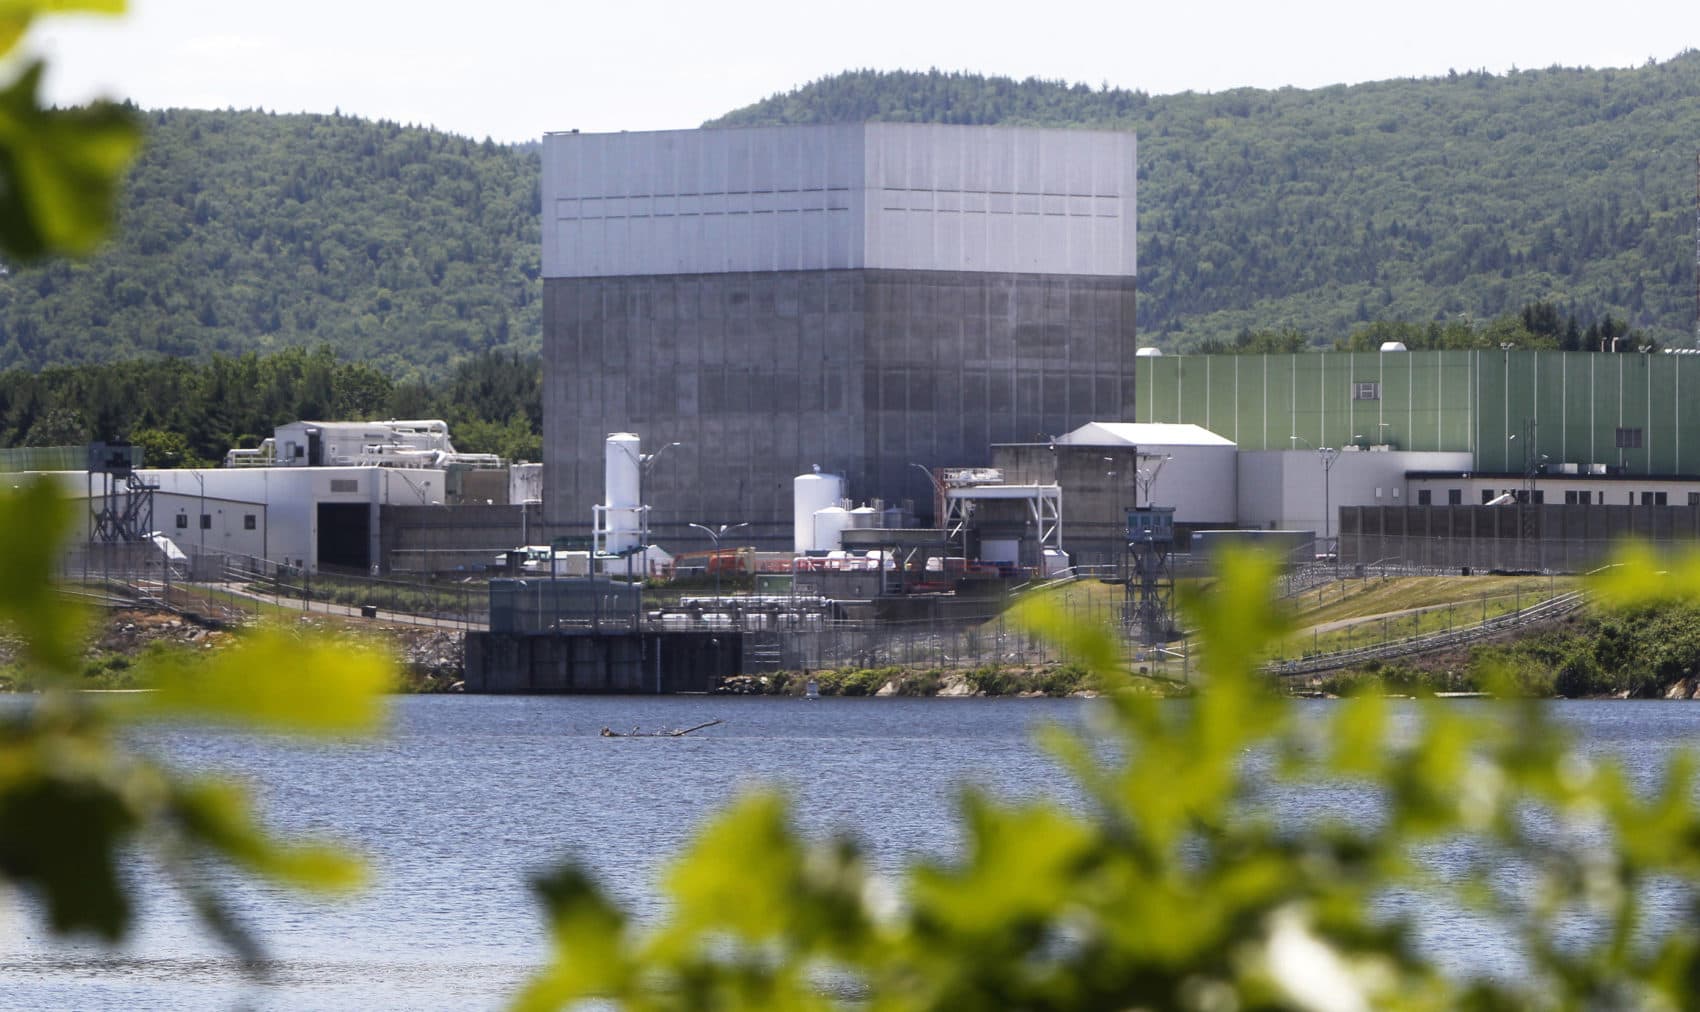 The Vermont Yankee Nuclear Power Station, in the town of Vernon, is seen in a 2013 file photo. (Toby Talbot/AP)